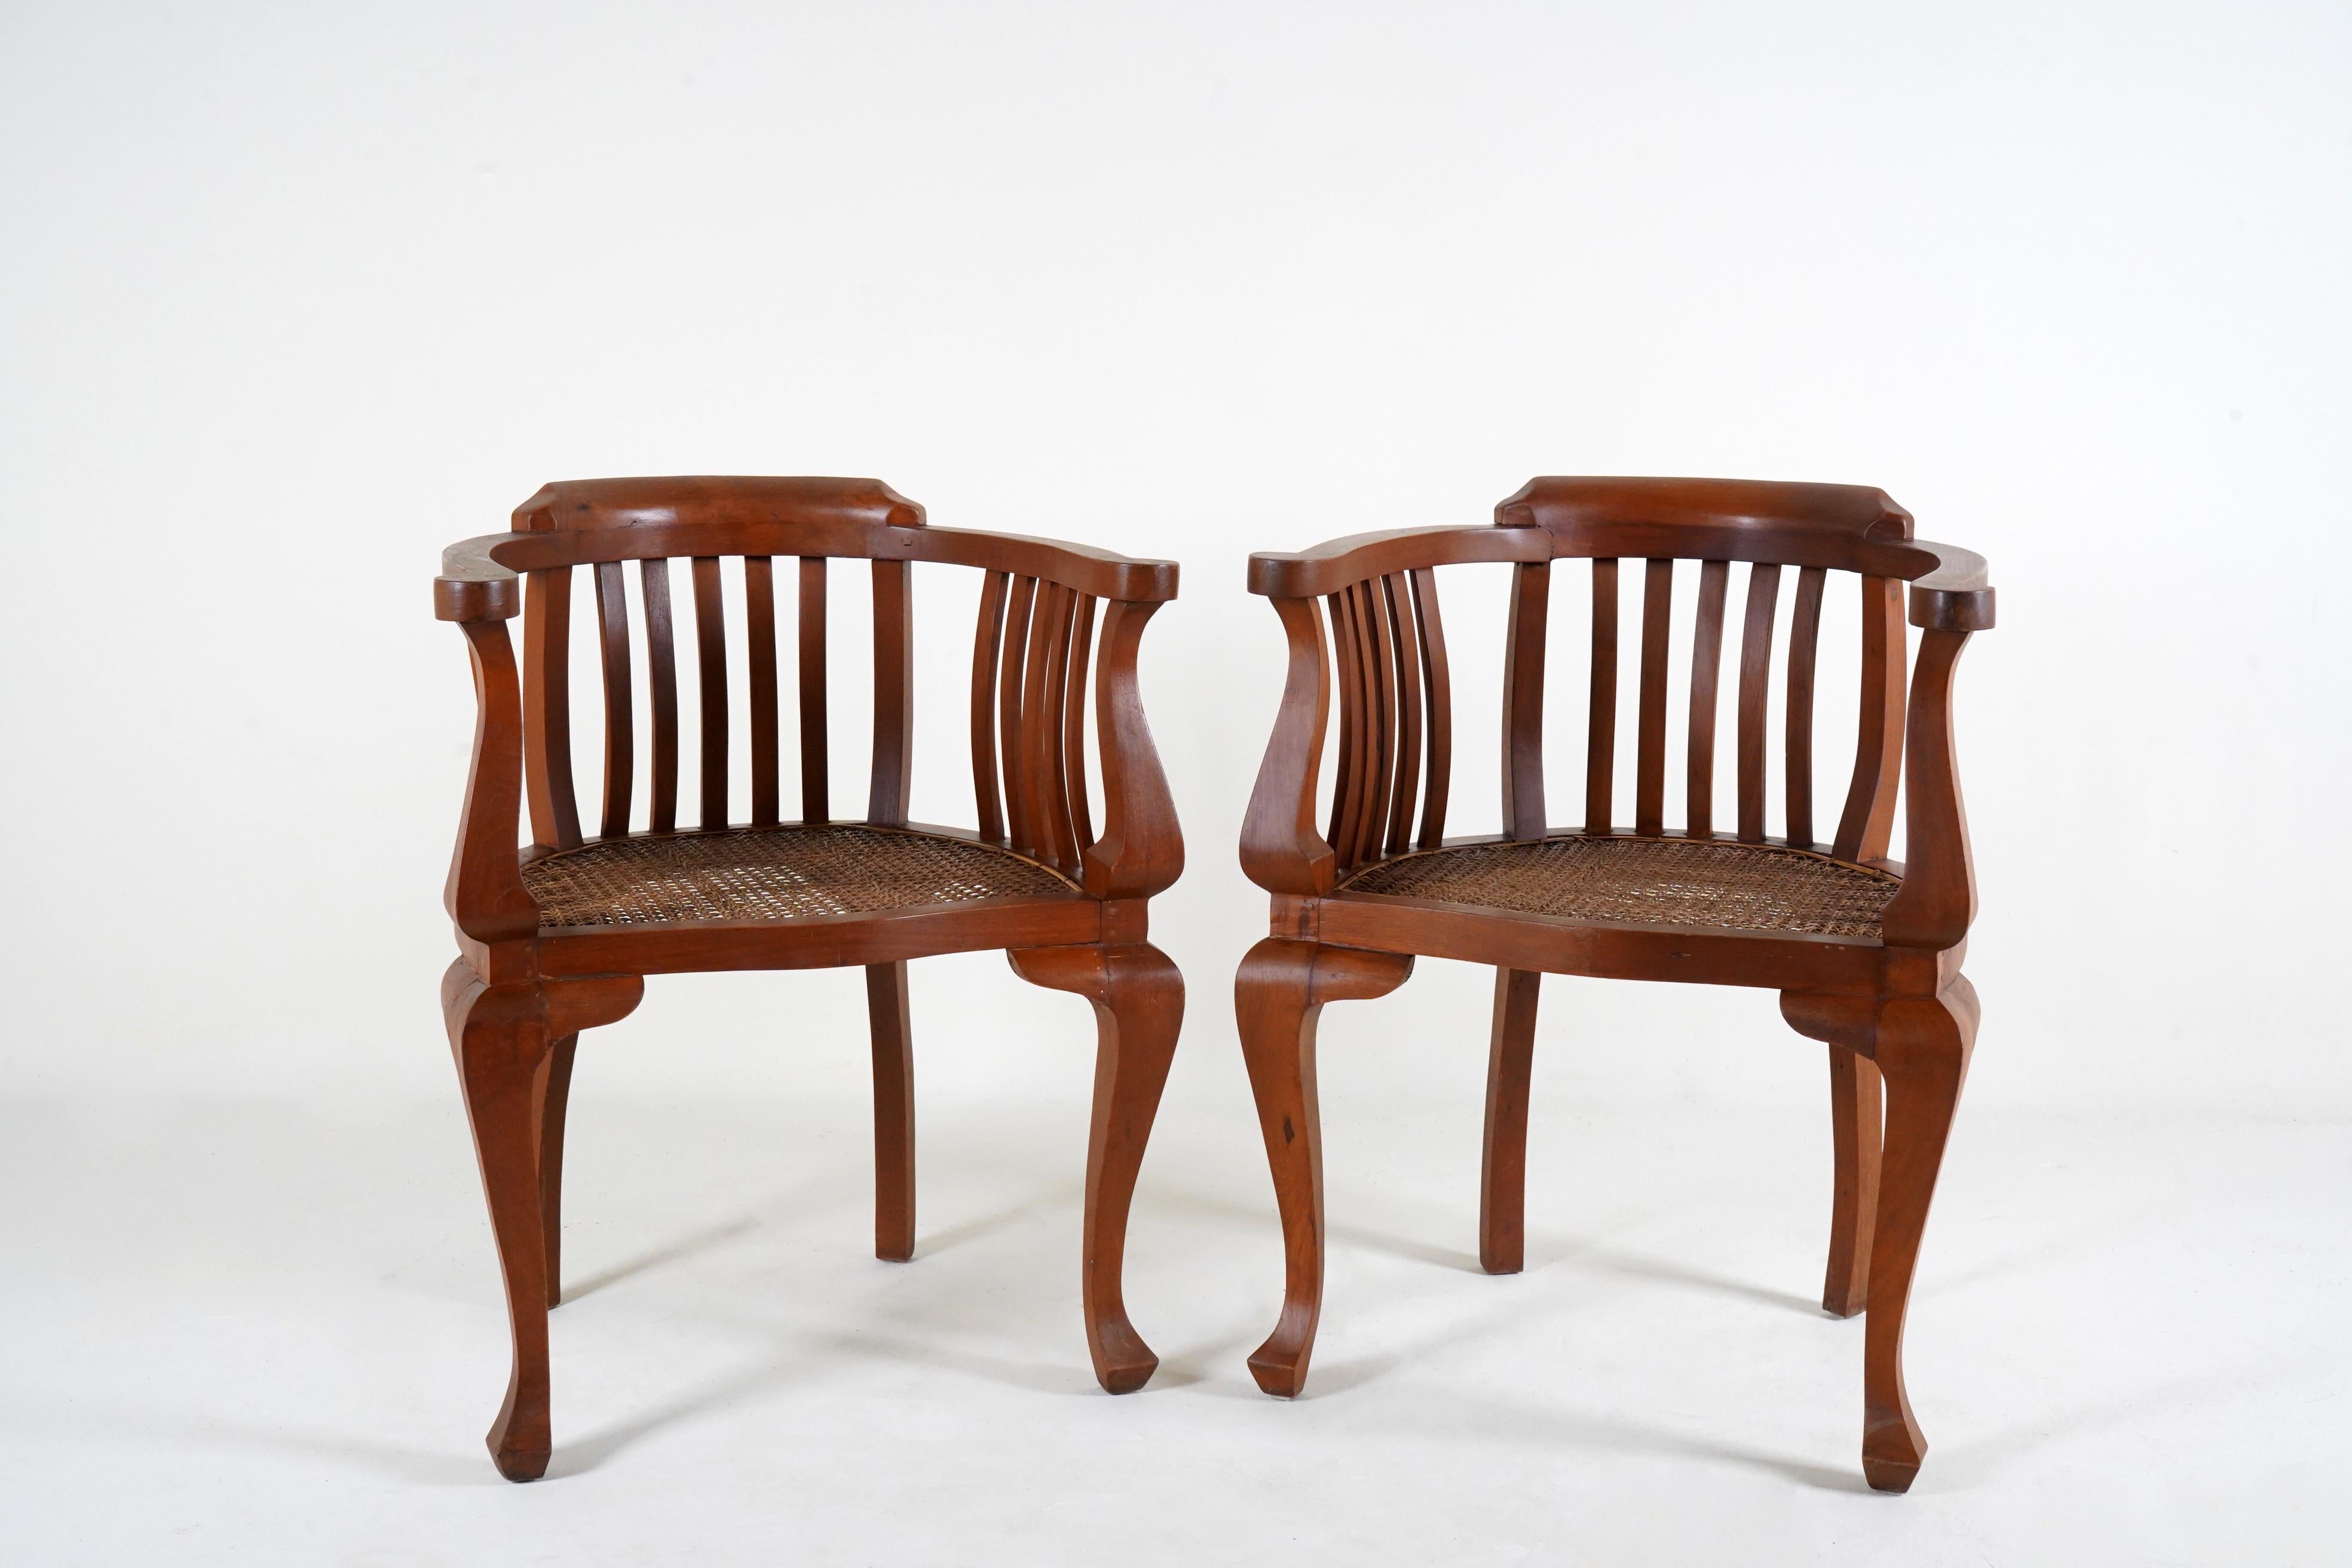 Burmese A Pair of British Colonial Teak Arm Chairs With Rattan Seats